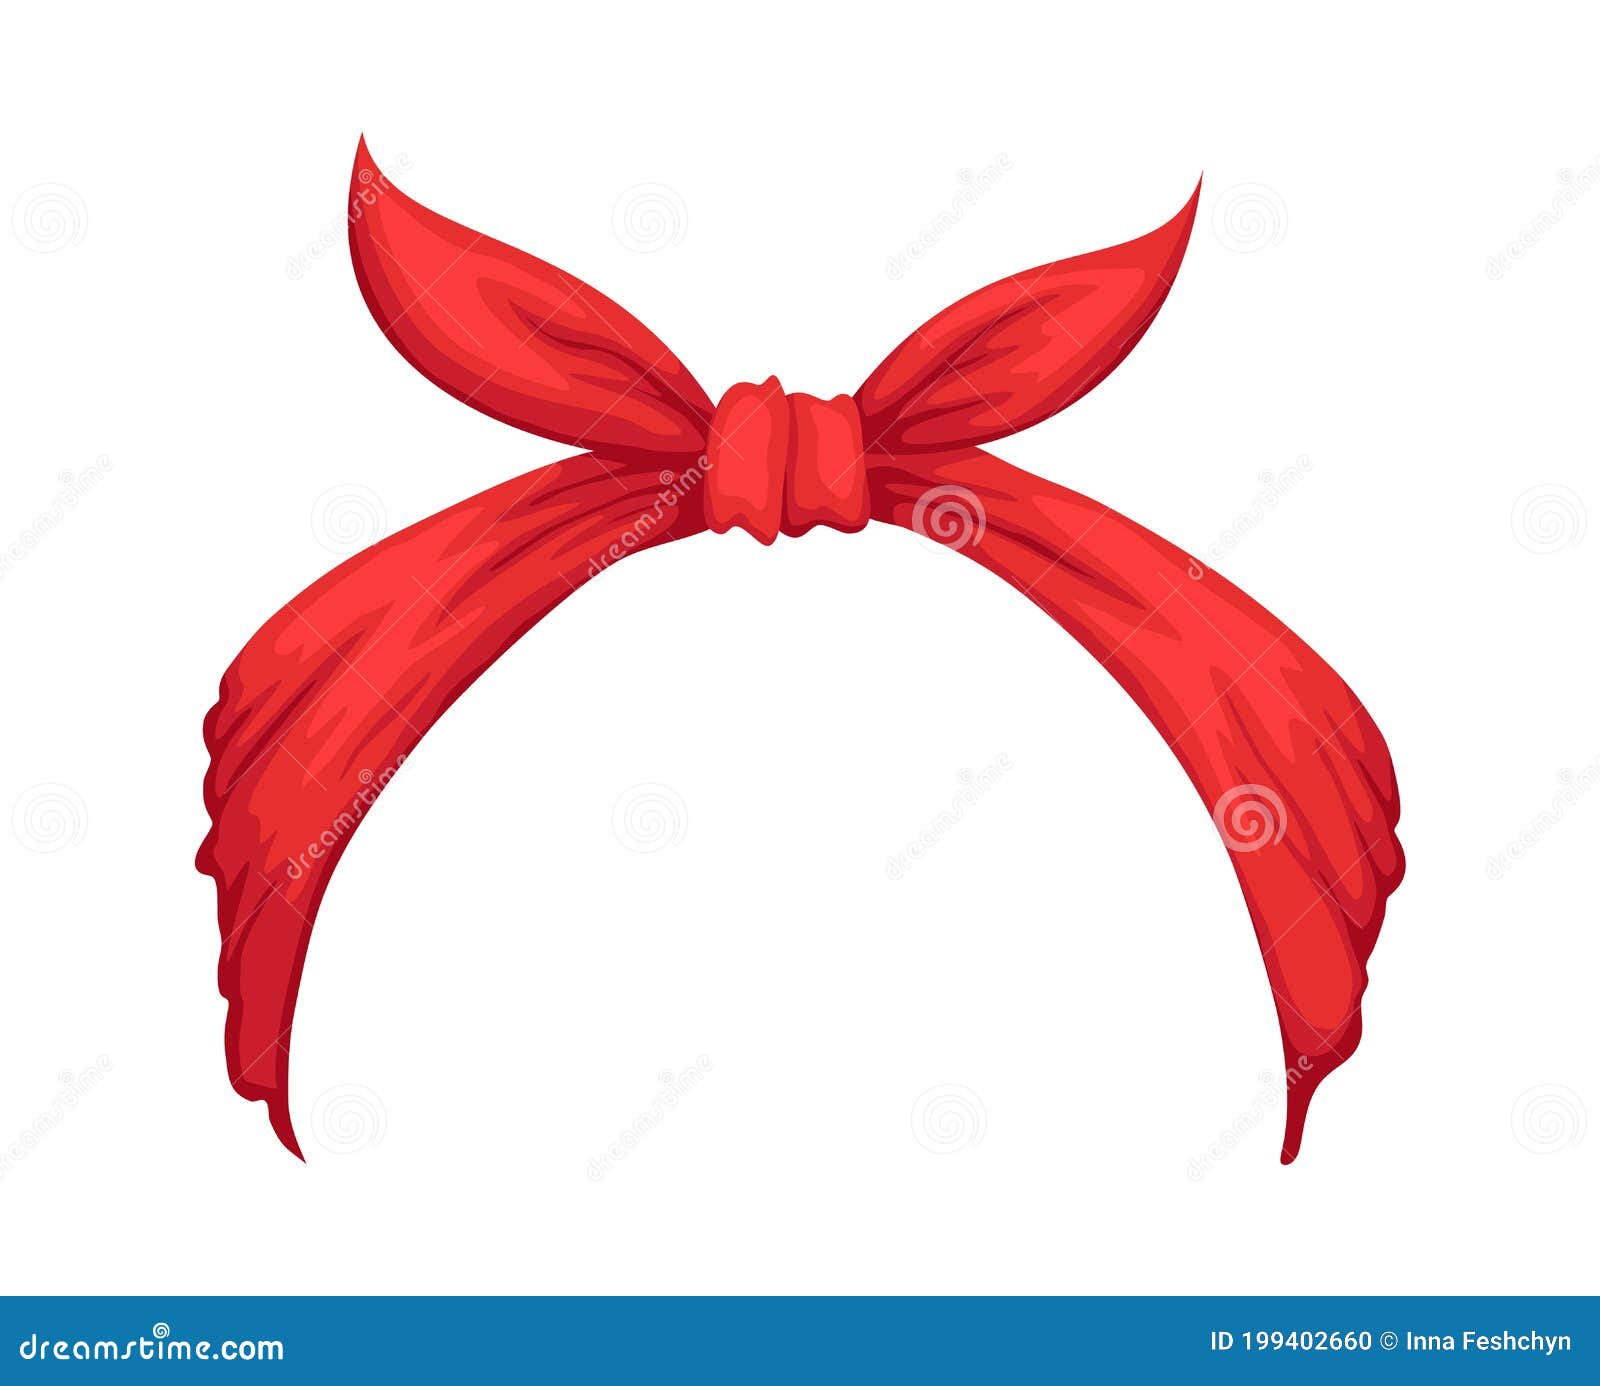 Retro Headband for Woman. Red Bandana for Hairstyle. Windy Hair ...